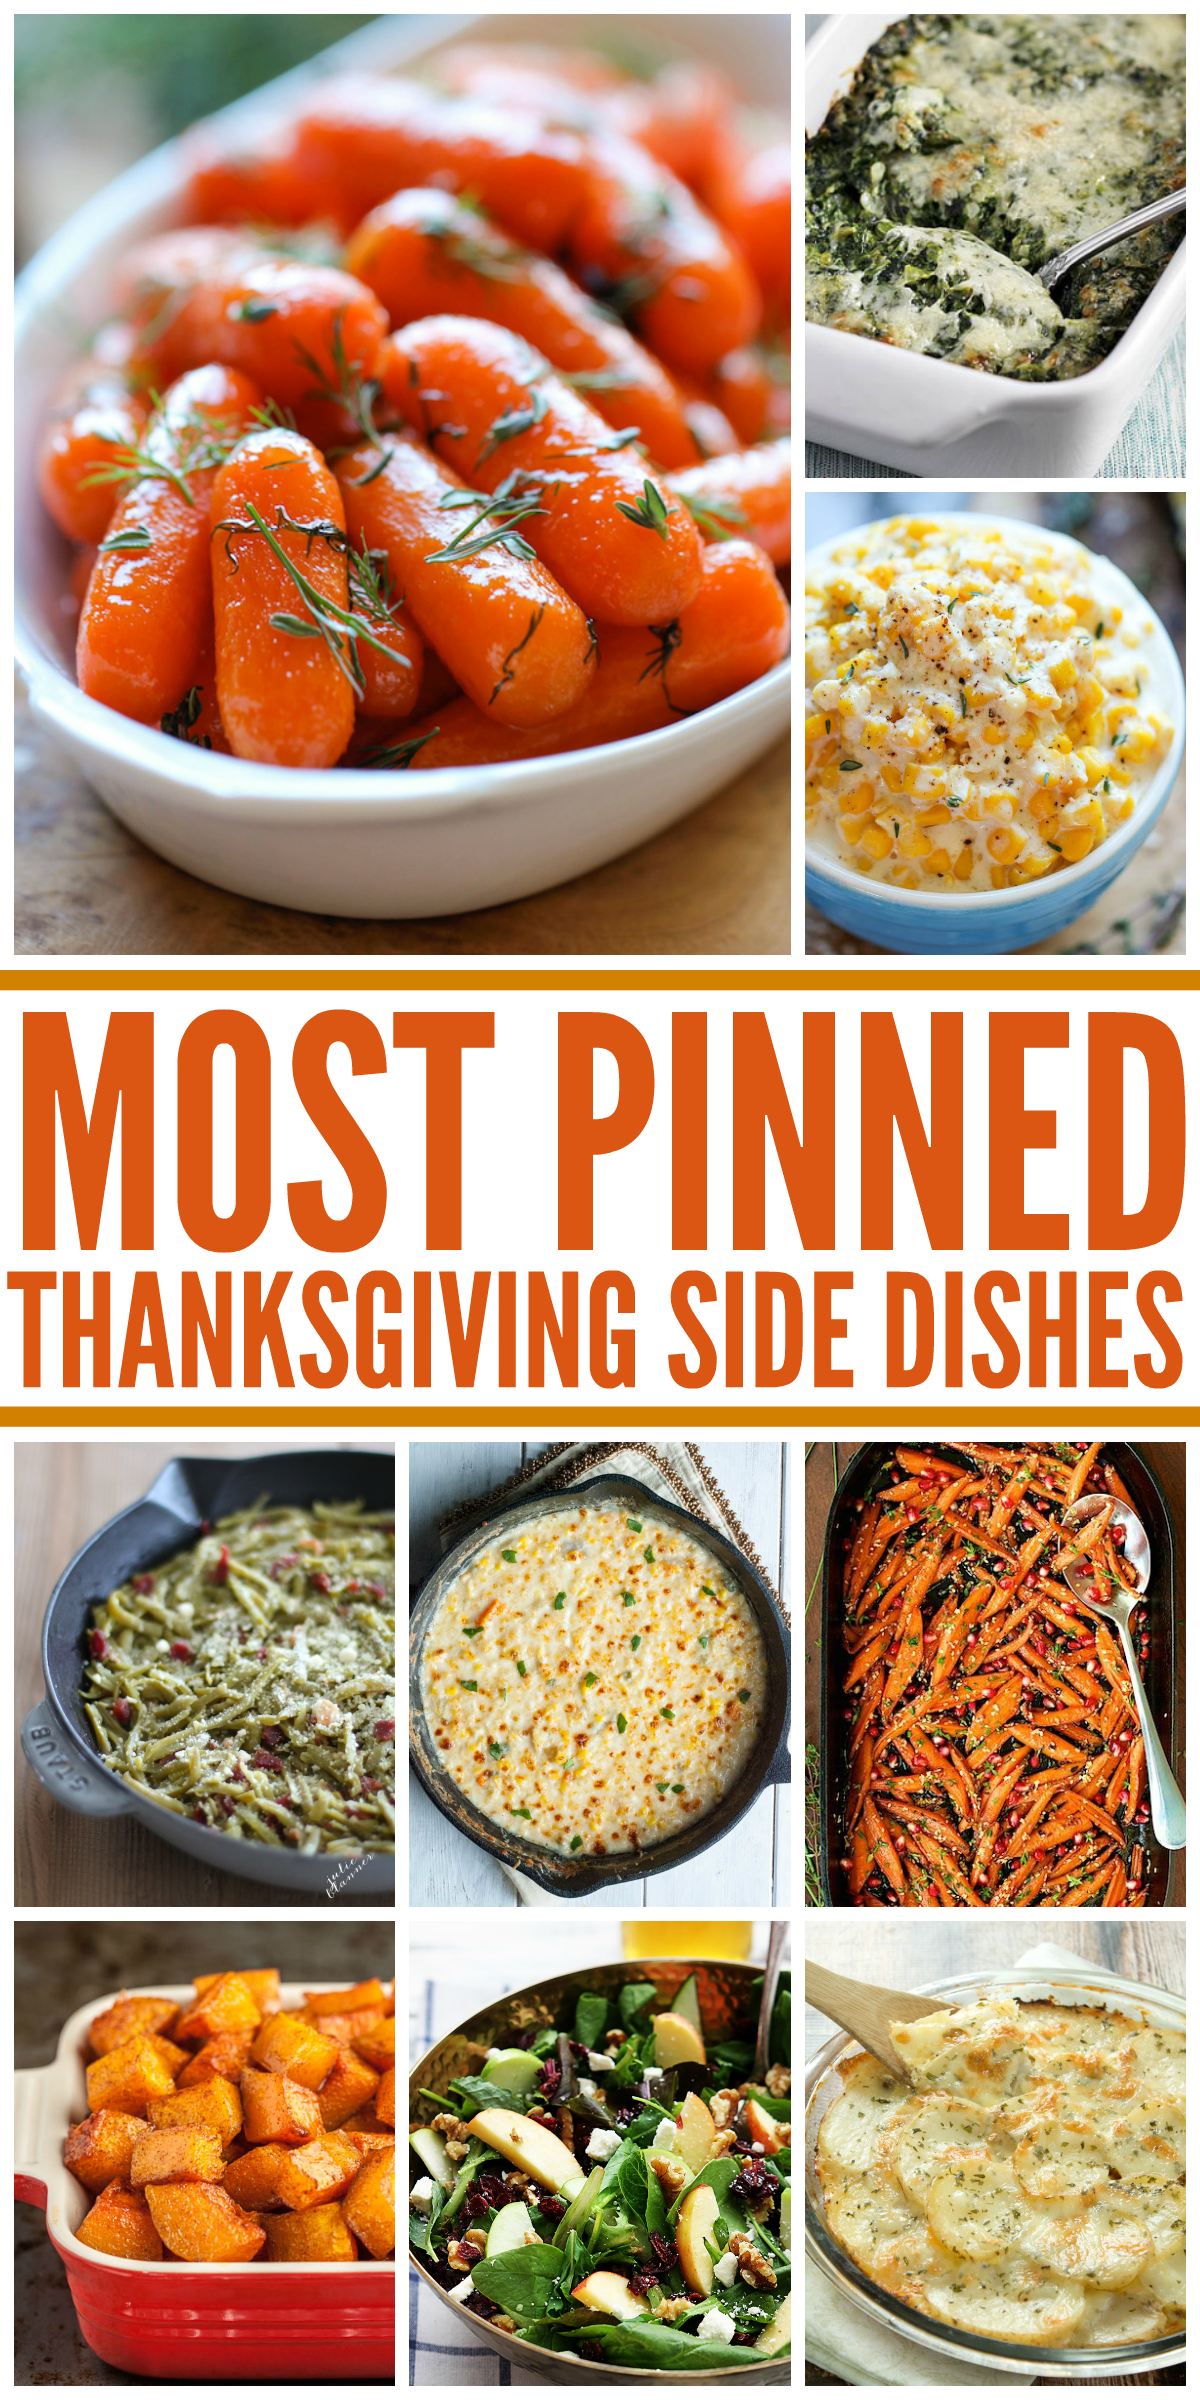 Check out the 25 MOST PINNED side dish recipes, perfect for Thanksgiving and Christmas! -   21 thanksgiving recipes carrots
 ideas